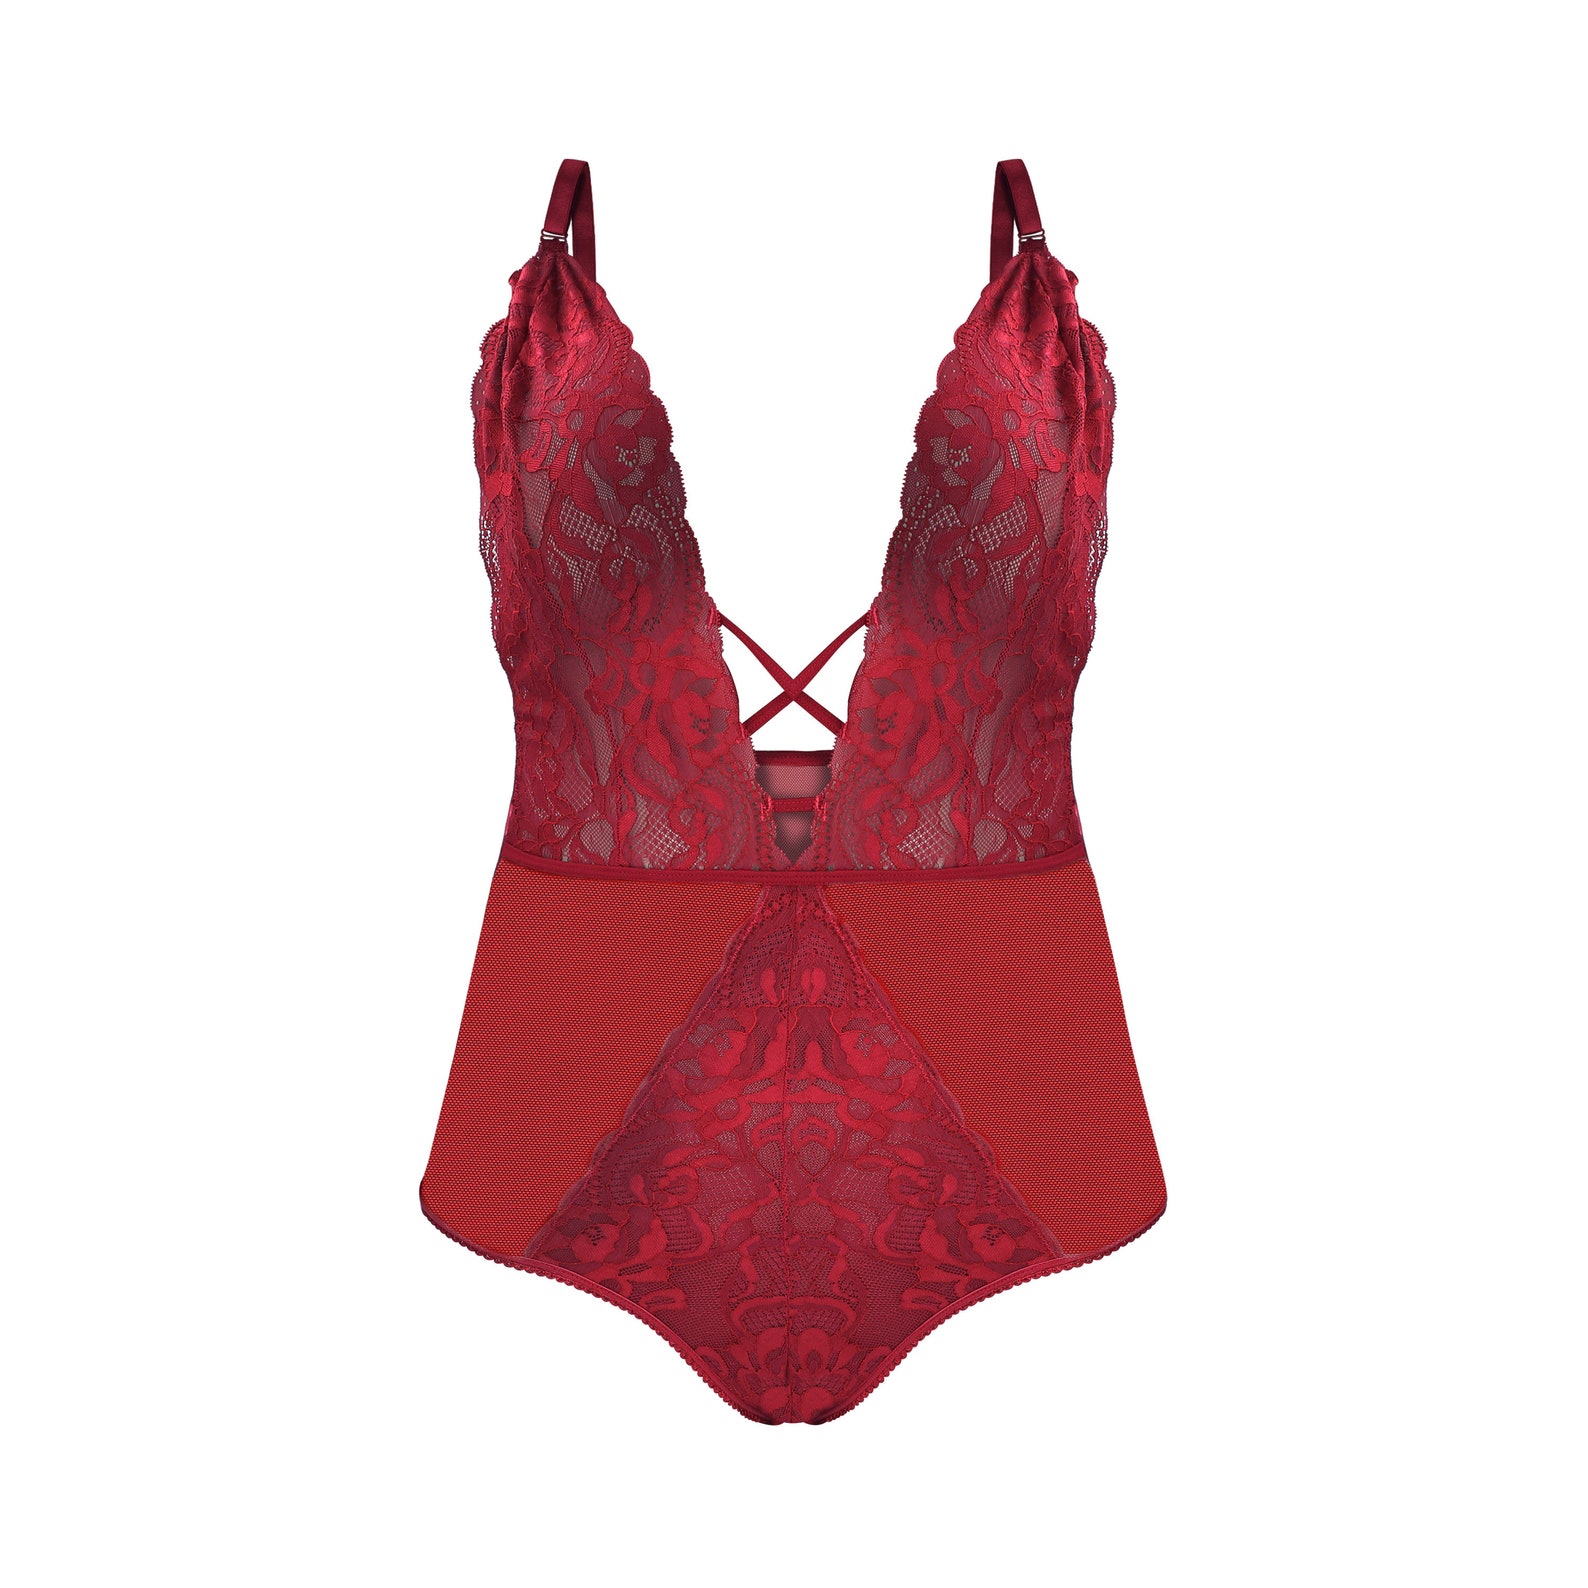 FUNKE: Lace See-through Bodysuit Plus Size Lace Lingerie Cherry Red ...